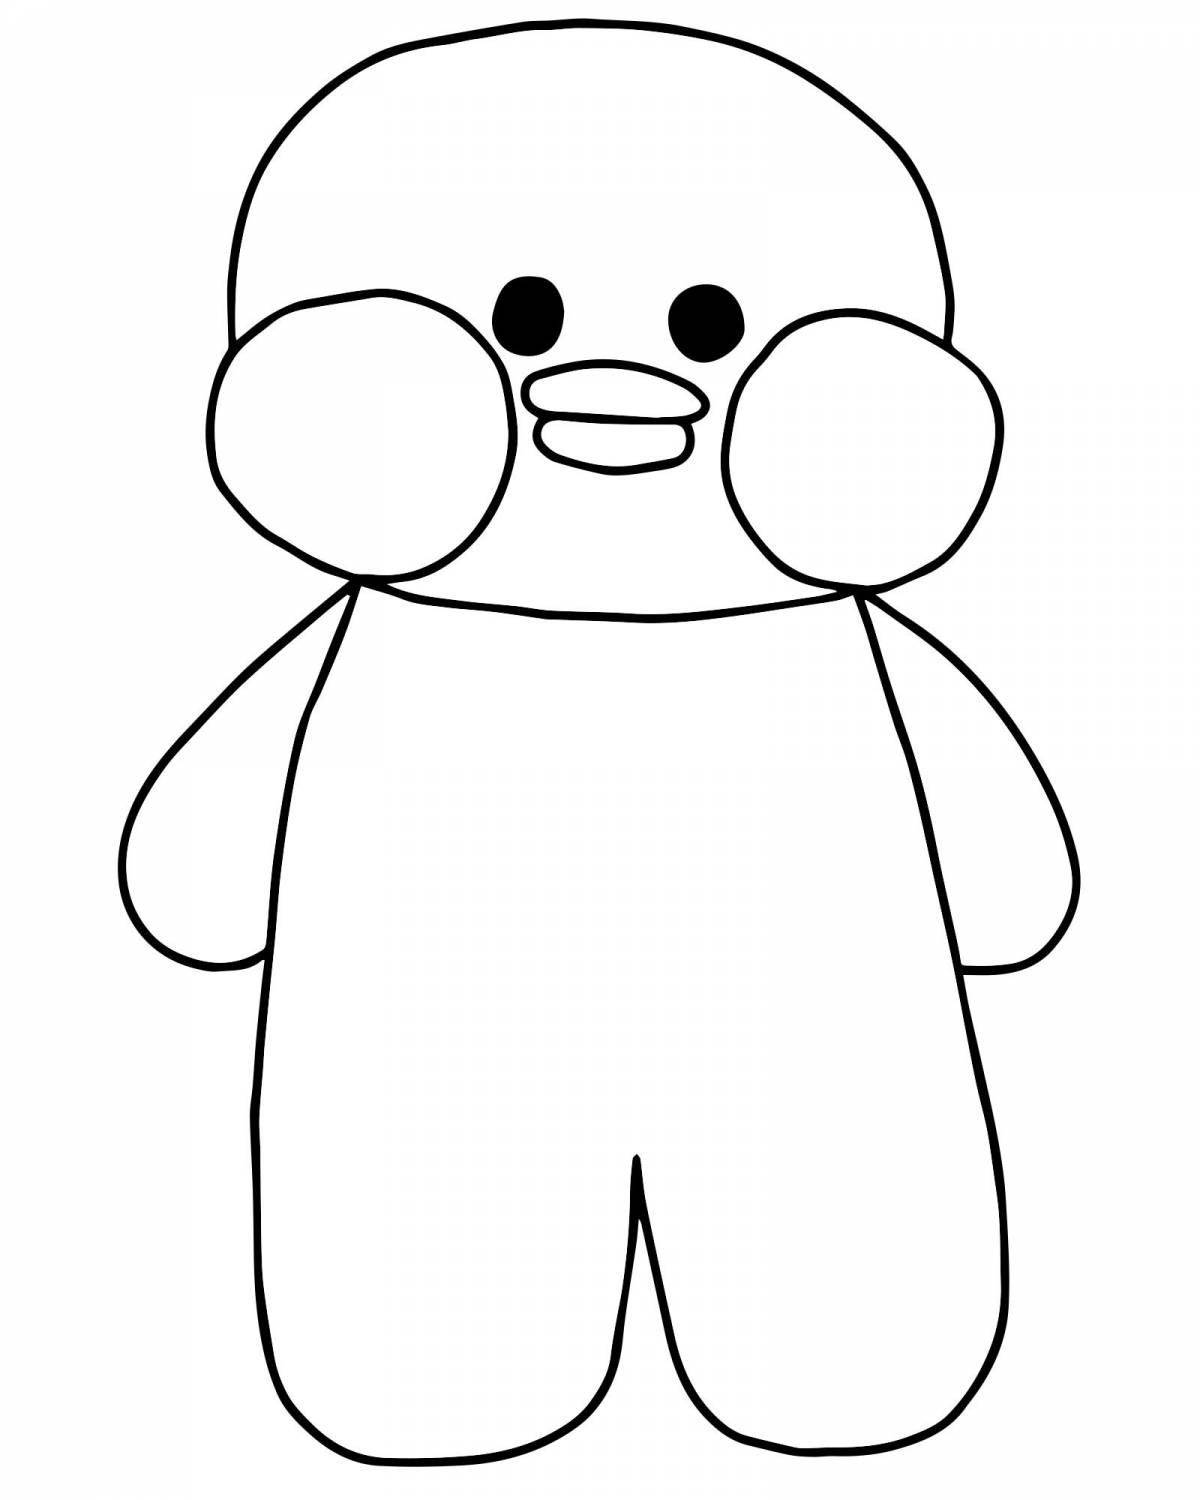 Colorful little duck coloring page - lalafanfan